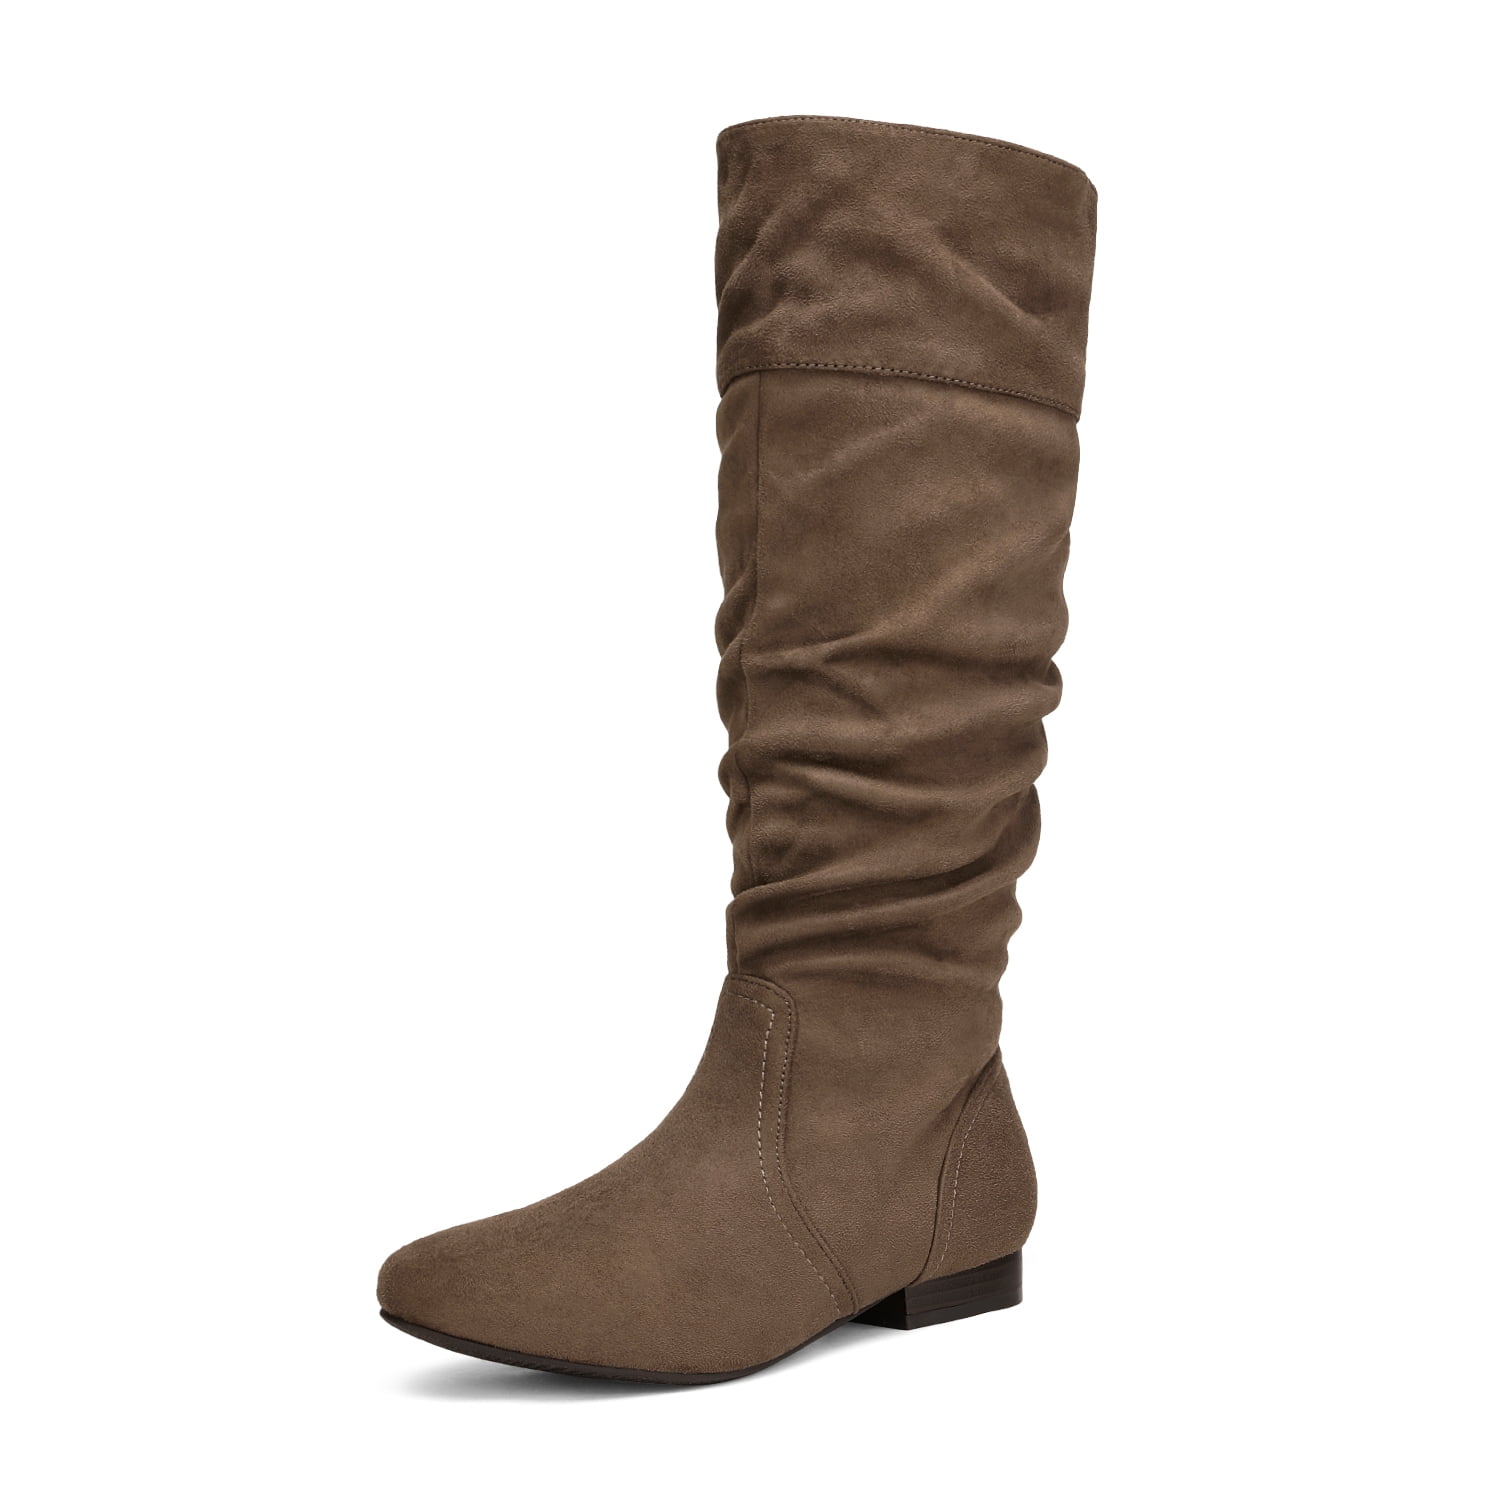 DREAM PAIRS Women's Suede Leather  Pull On Flat Slouchy Knee High Boots Shoes US